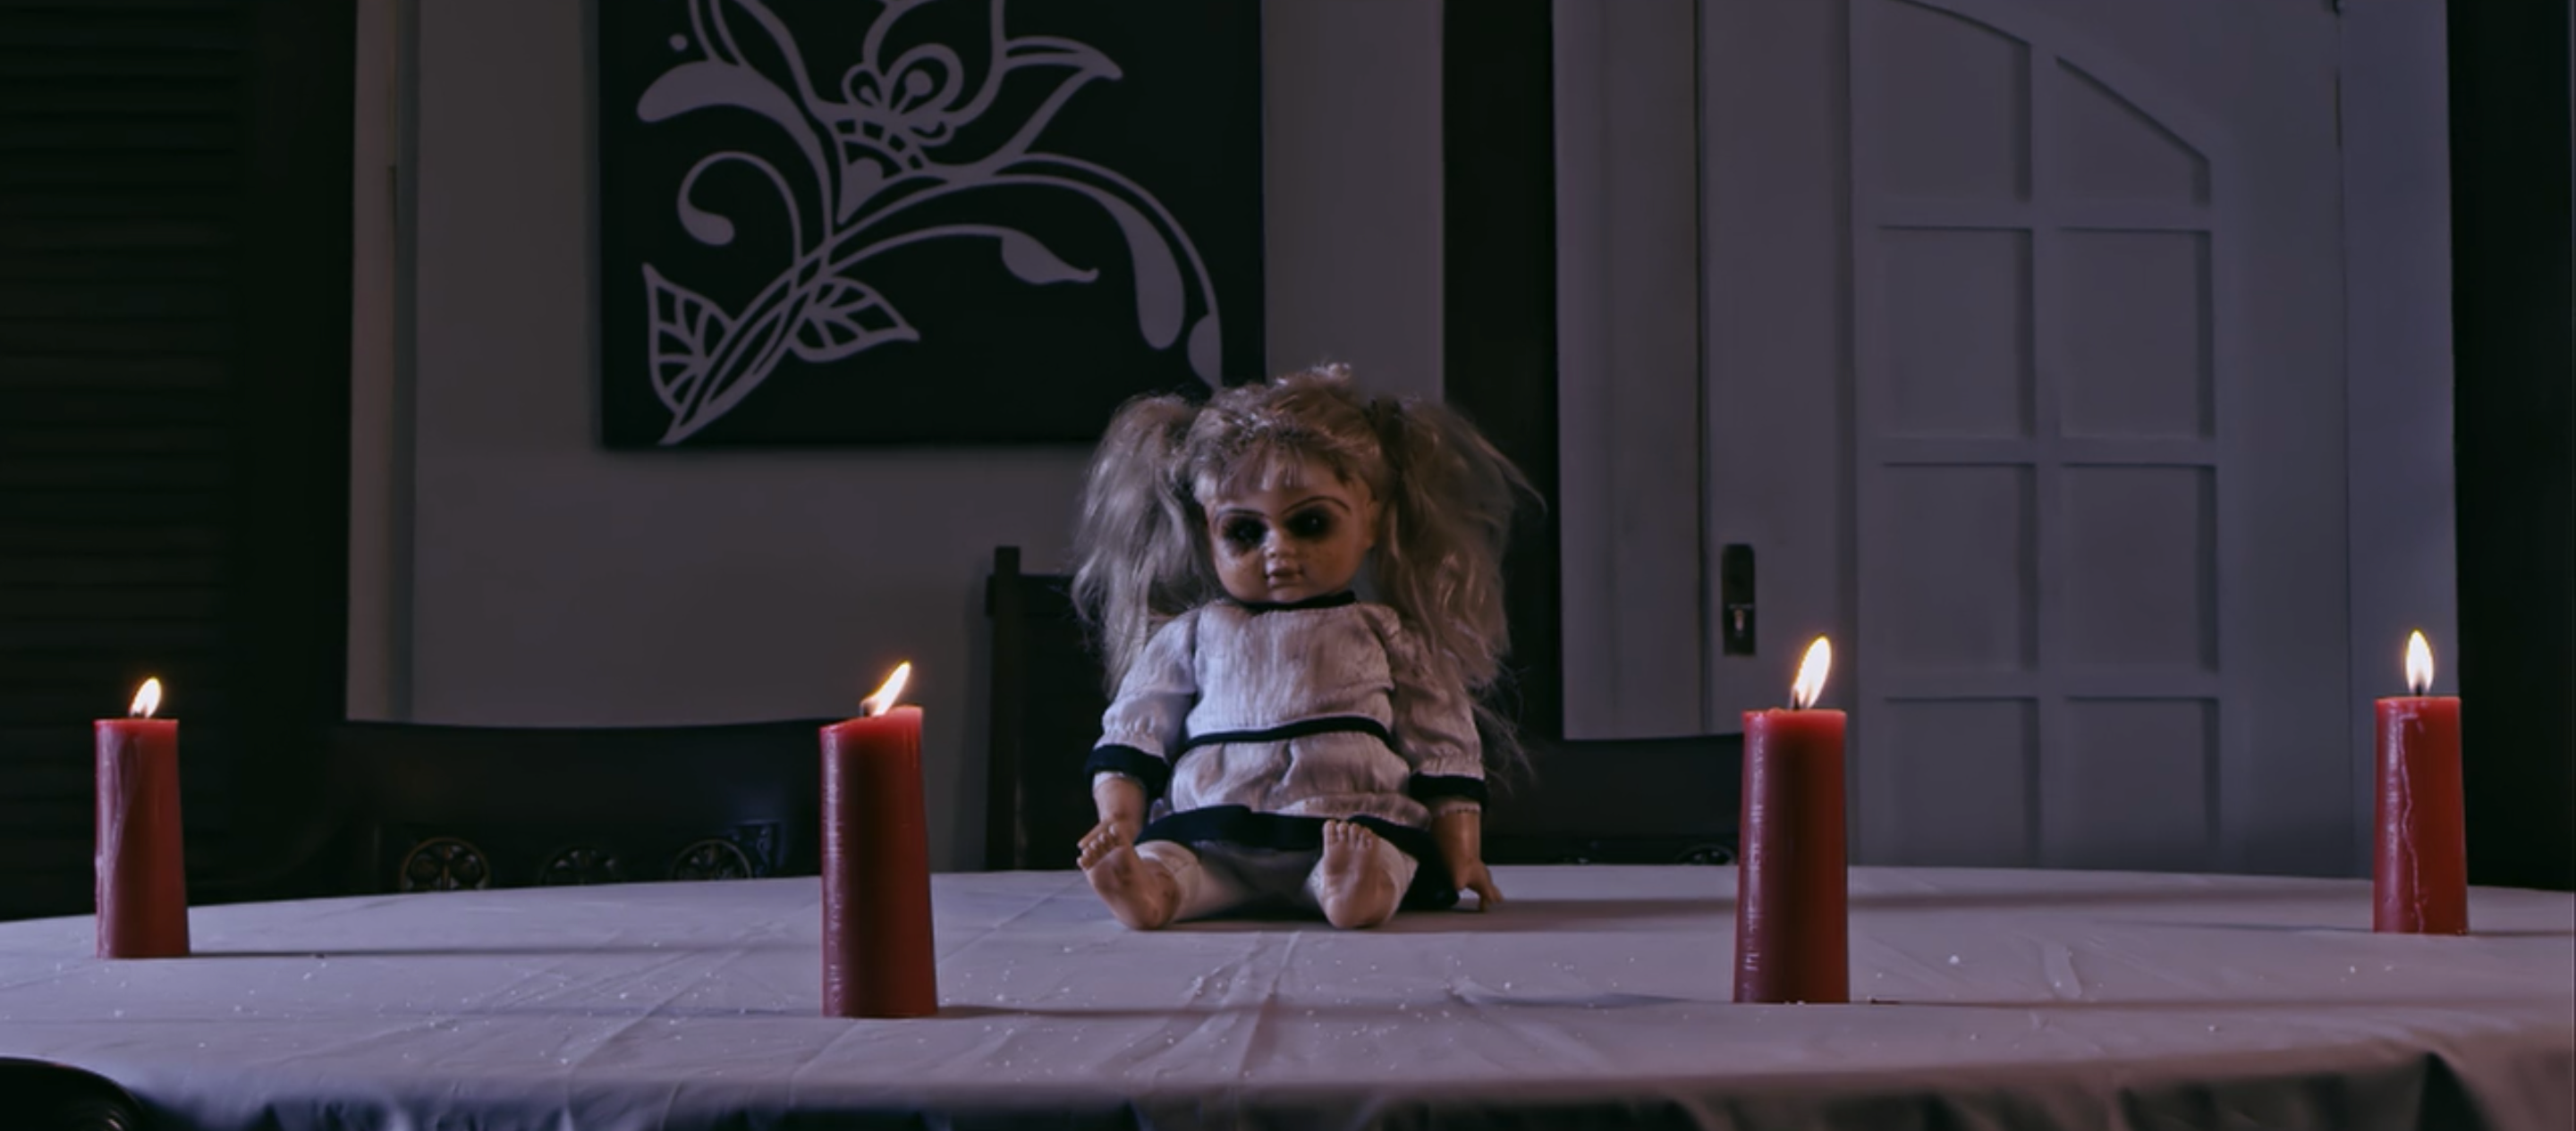 Indonesian Horror Flick The Doll Is A Cliche Yet Impressively